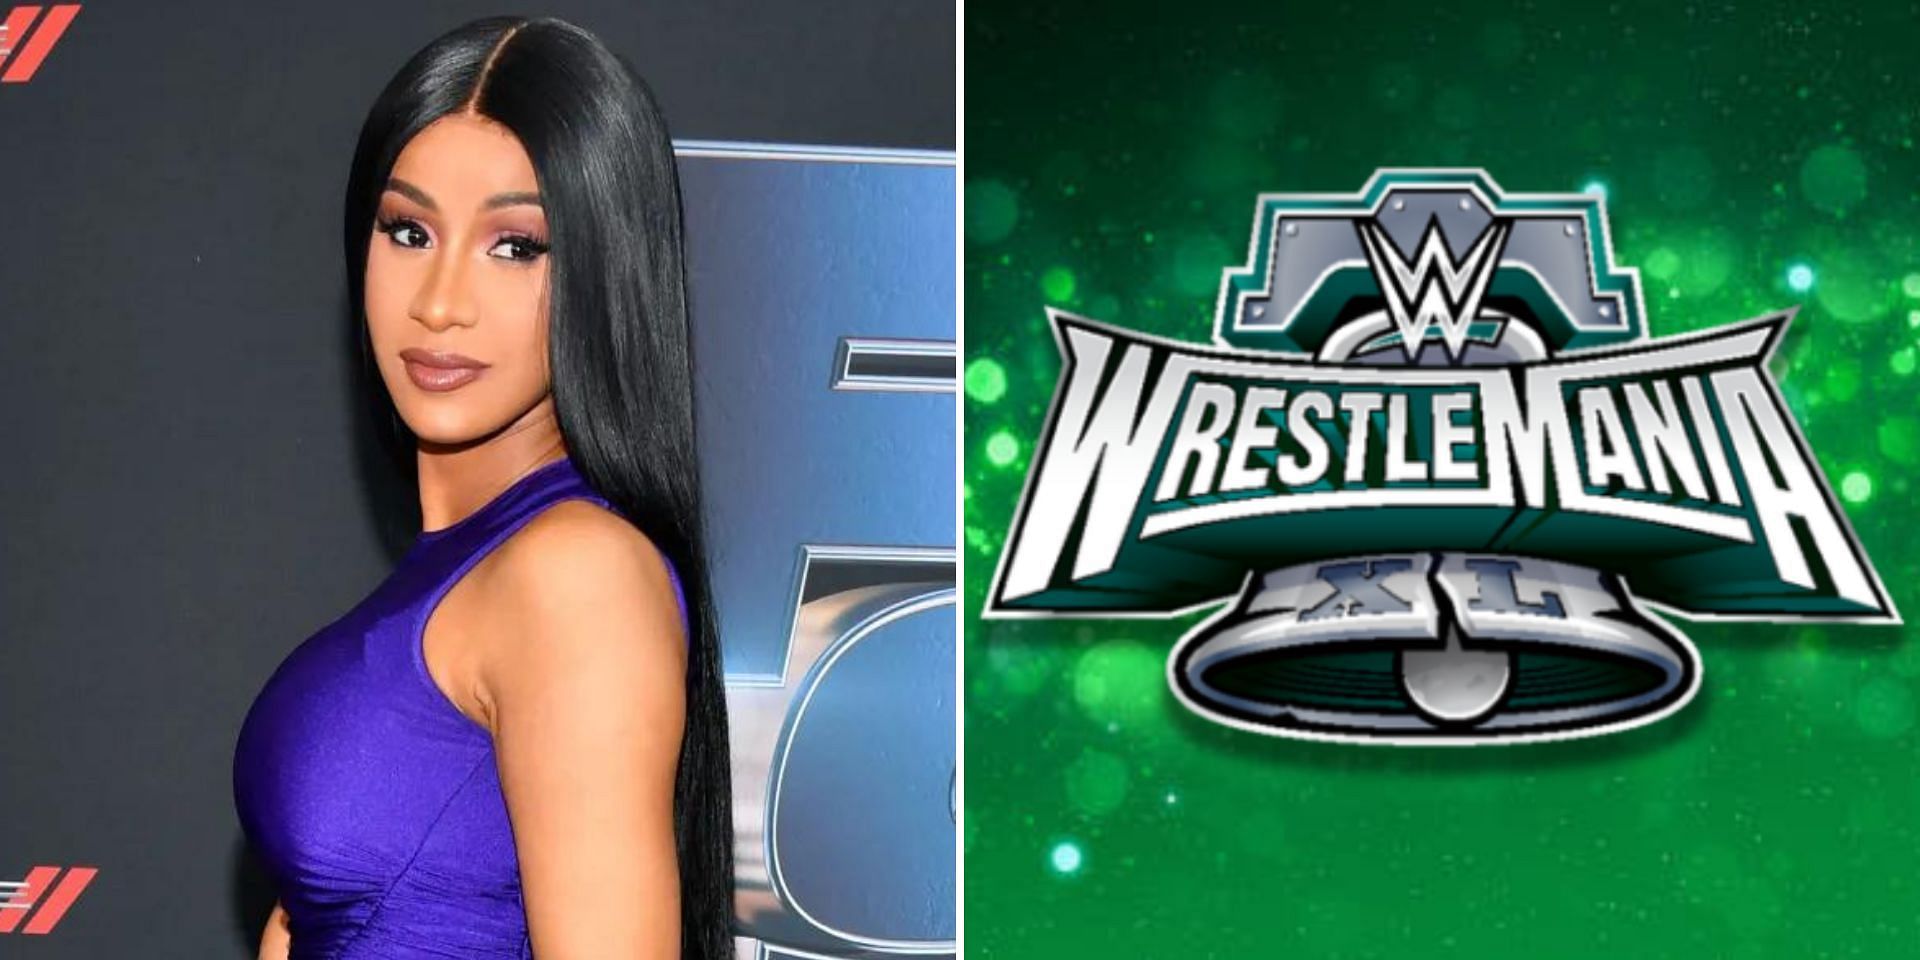 Cardi B wants to attend a WWE event